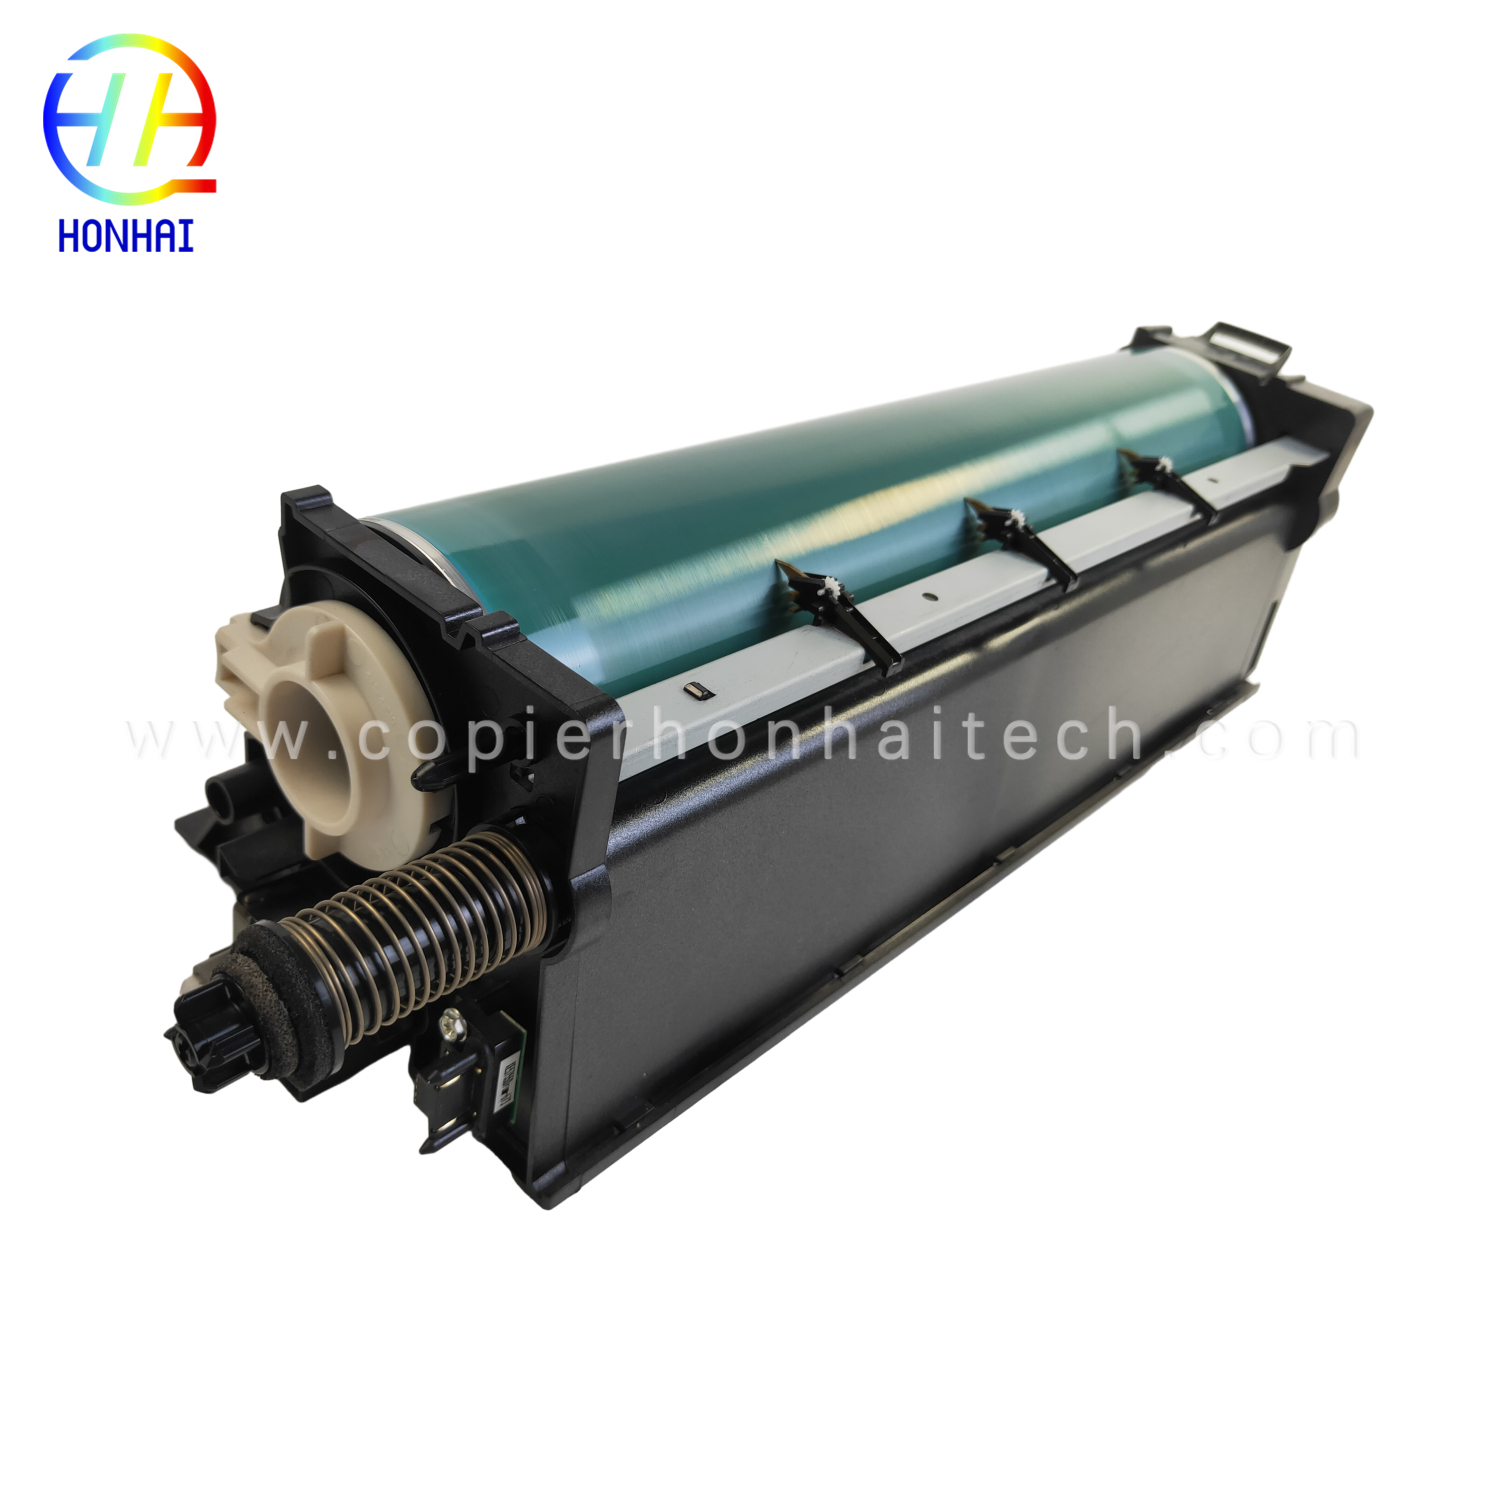 Drum Unit for Xerox WorkCentre 5150 5645 5655 5665 5675 5687 5740 5755 5765 5775 5790 5840 5845 5855 5865 5875 5890 113R00673 113R673